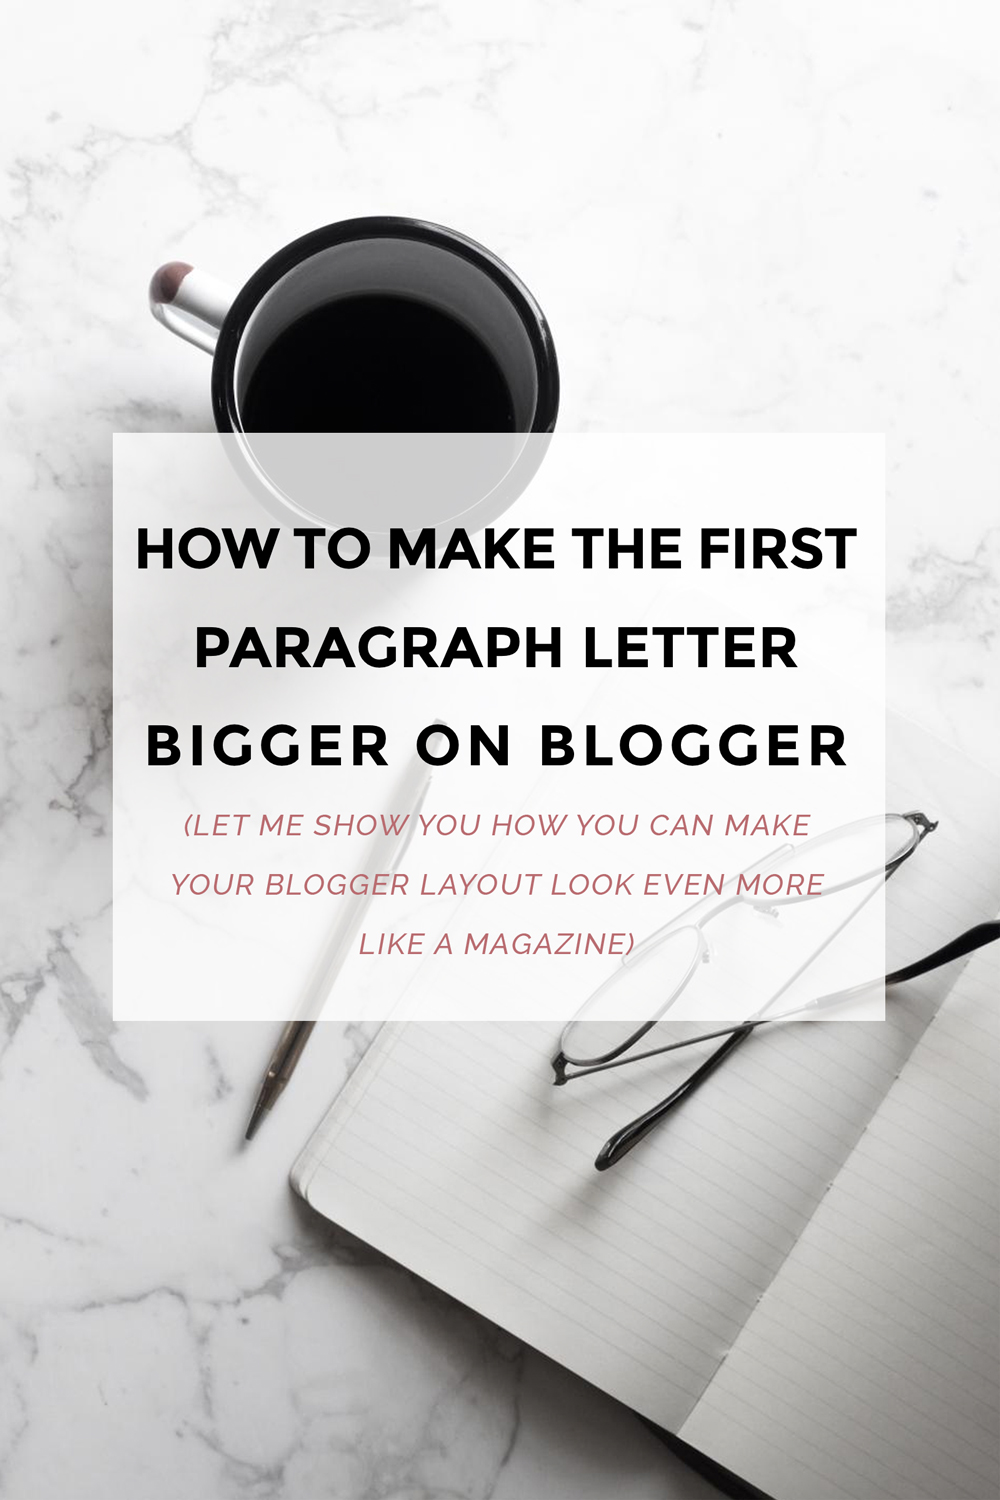 How to Make the First Paragraph Letter Bigger on Blogger?